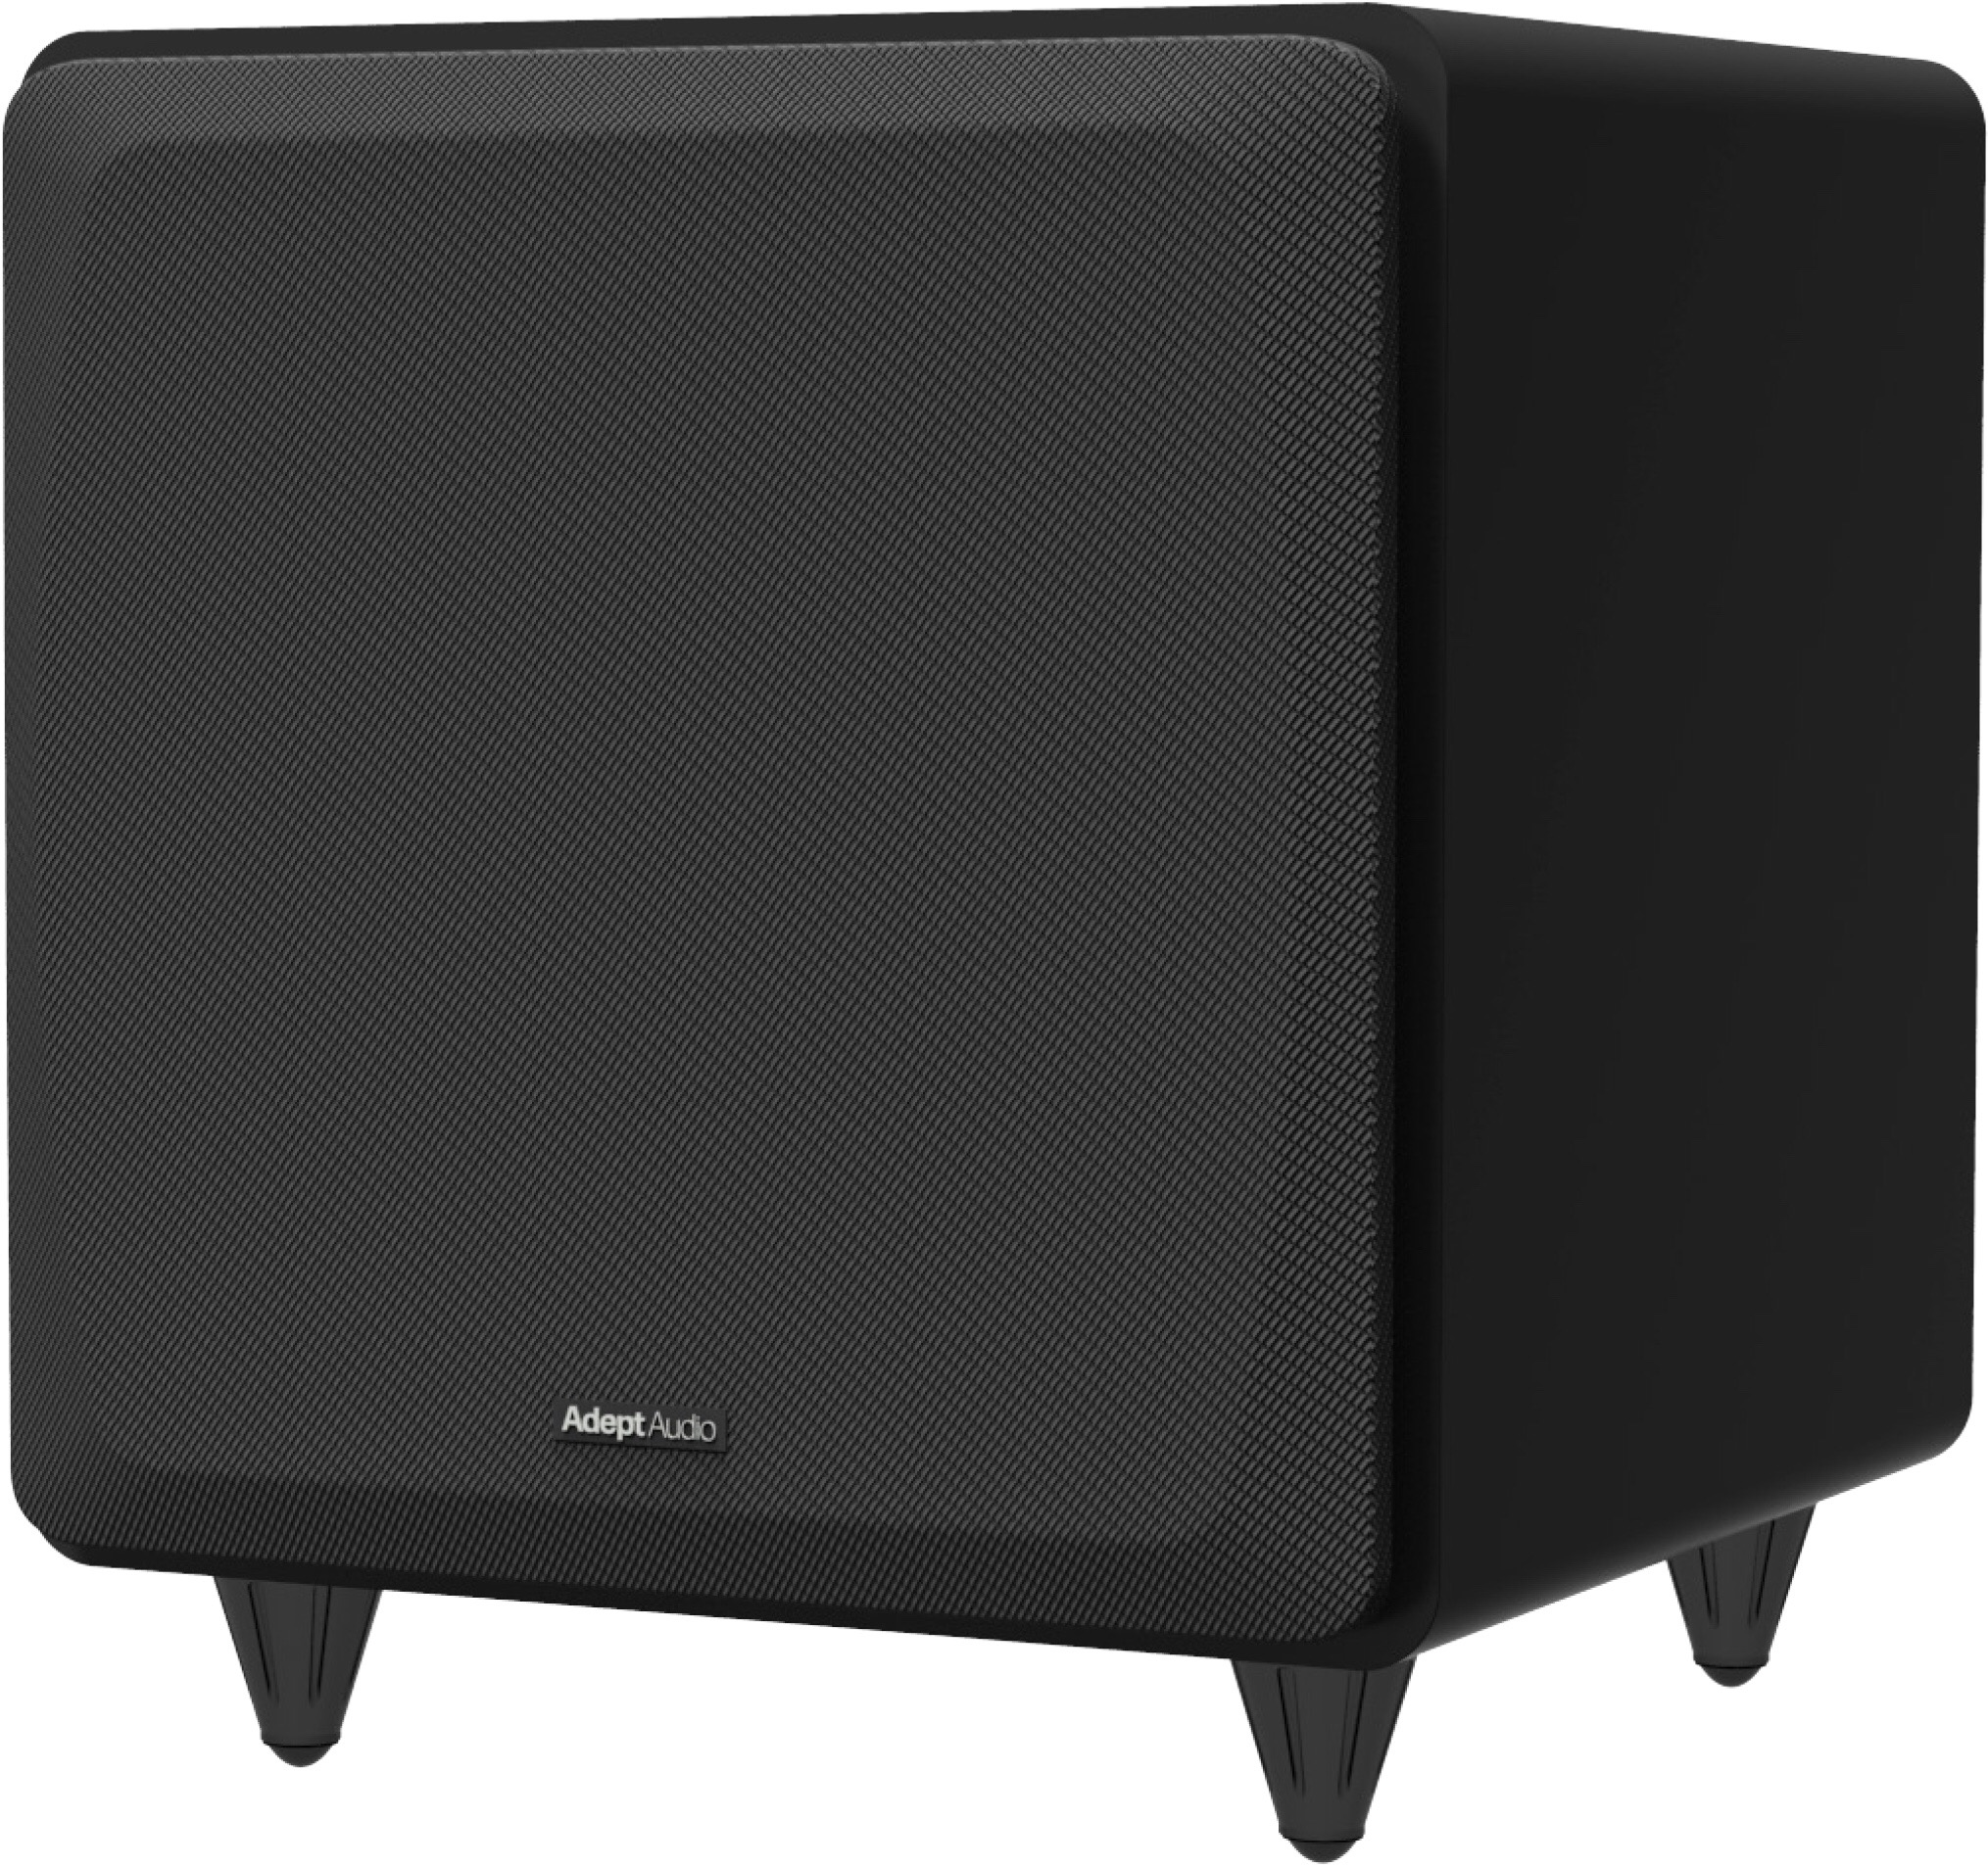 Self-Powered Subwoofer (Dual Woofer 8 inch) - Adept Audio - ADS8